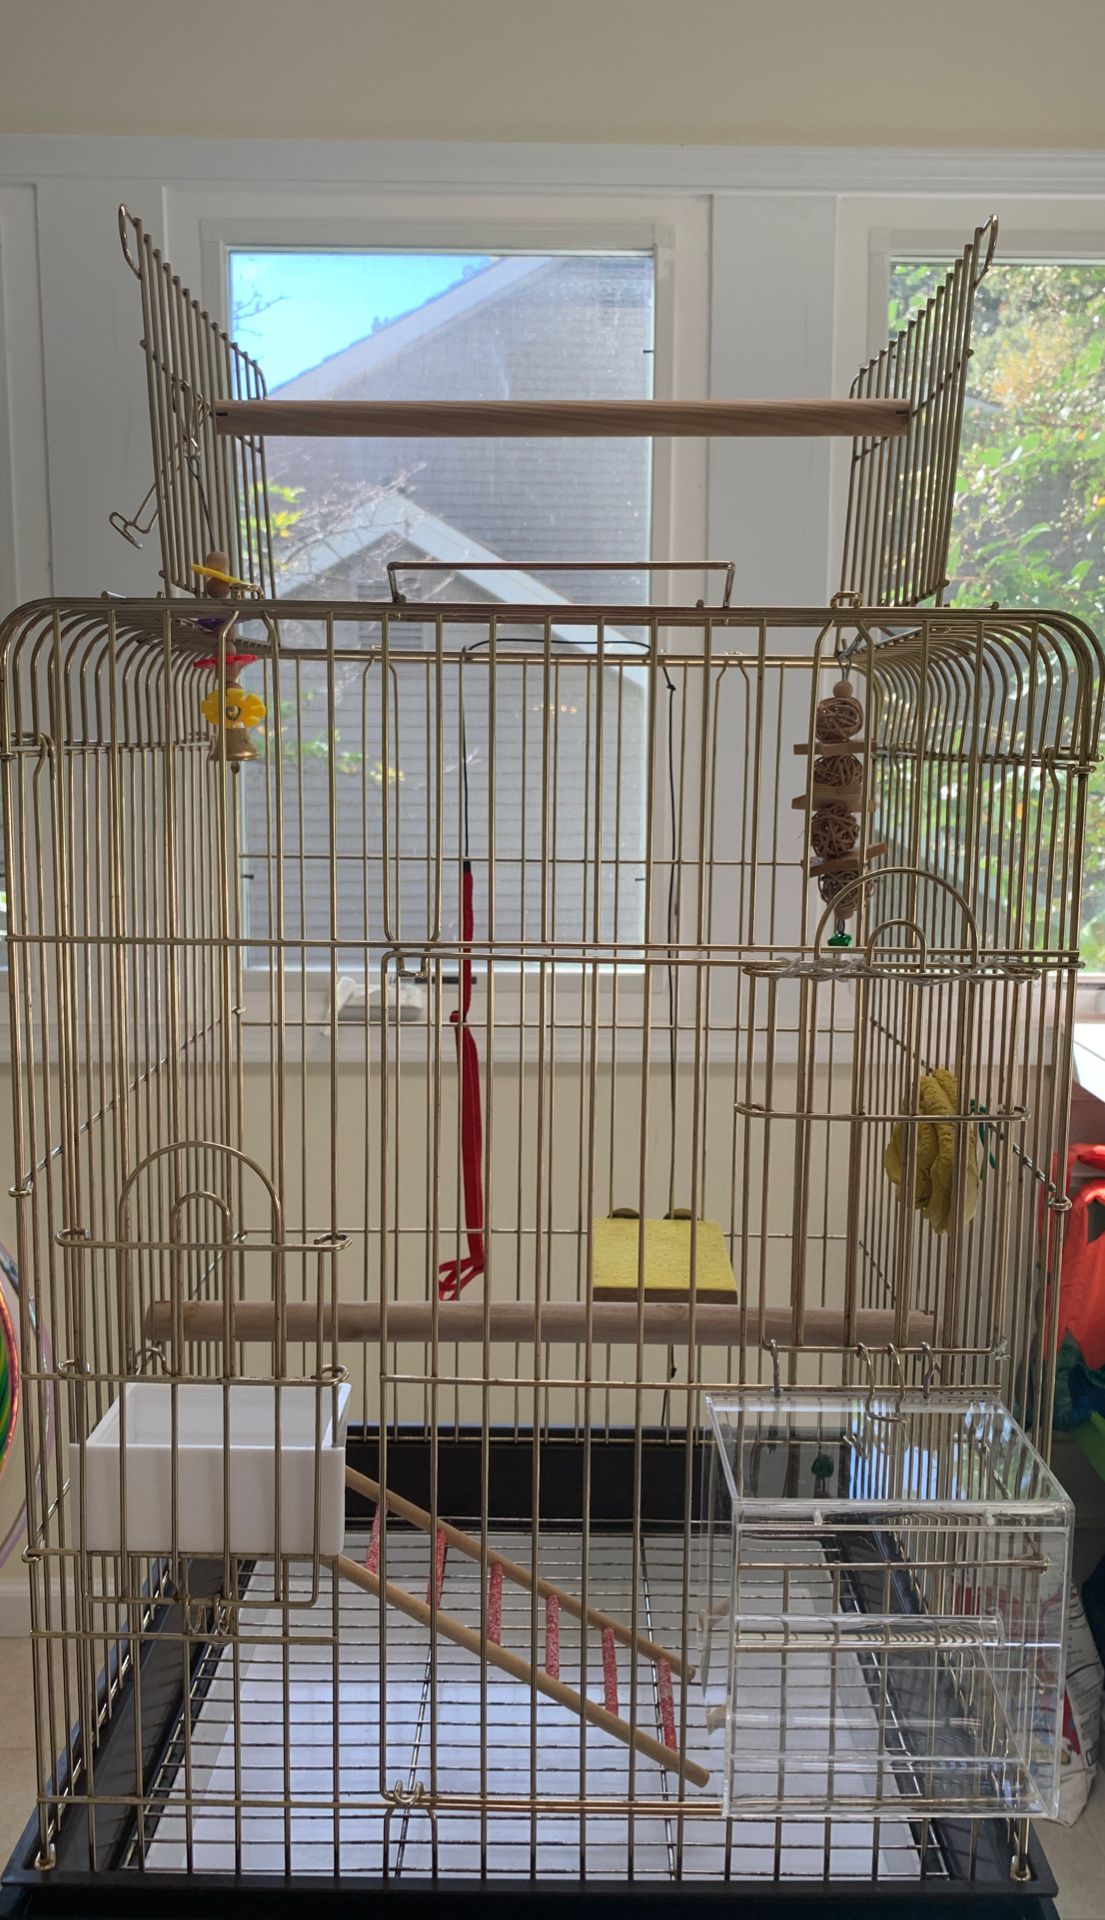 Bird Cage Habitat Fit For Cockatiels, Parrots With Perch And Stand